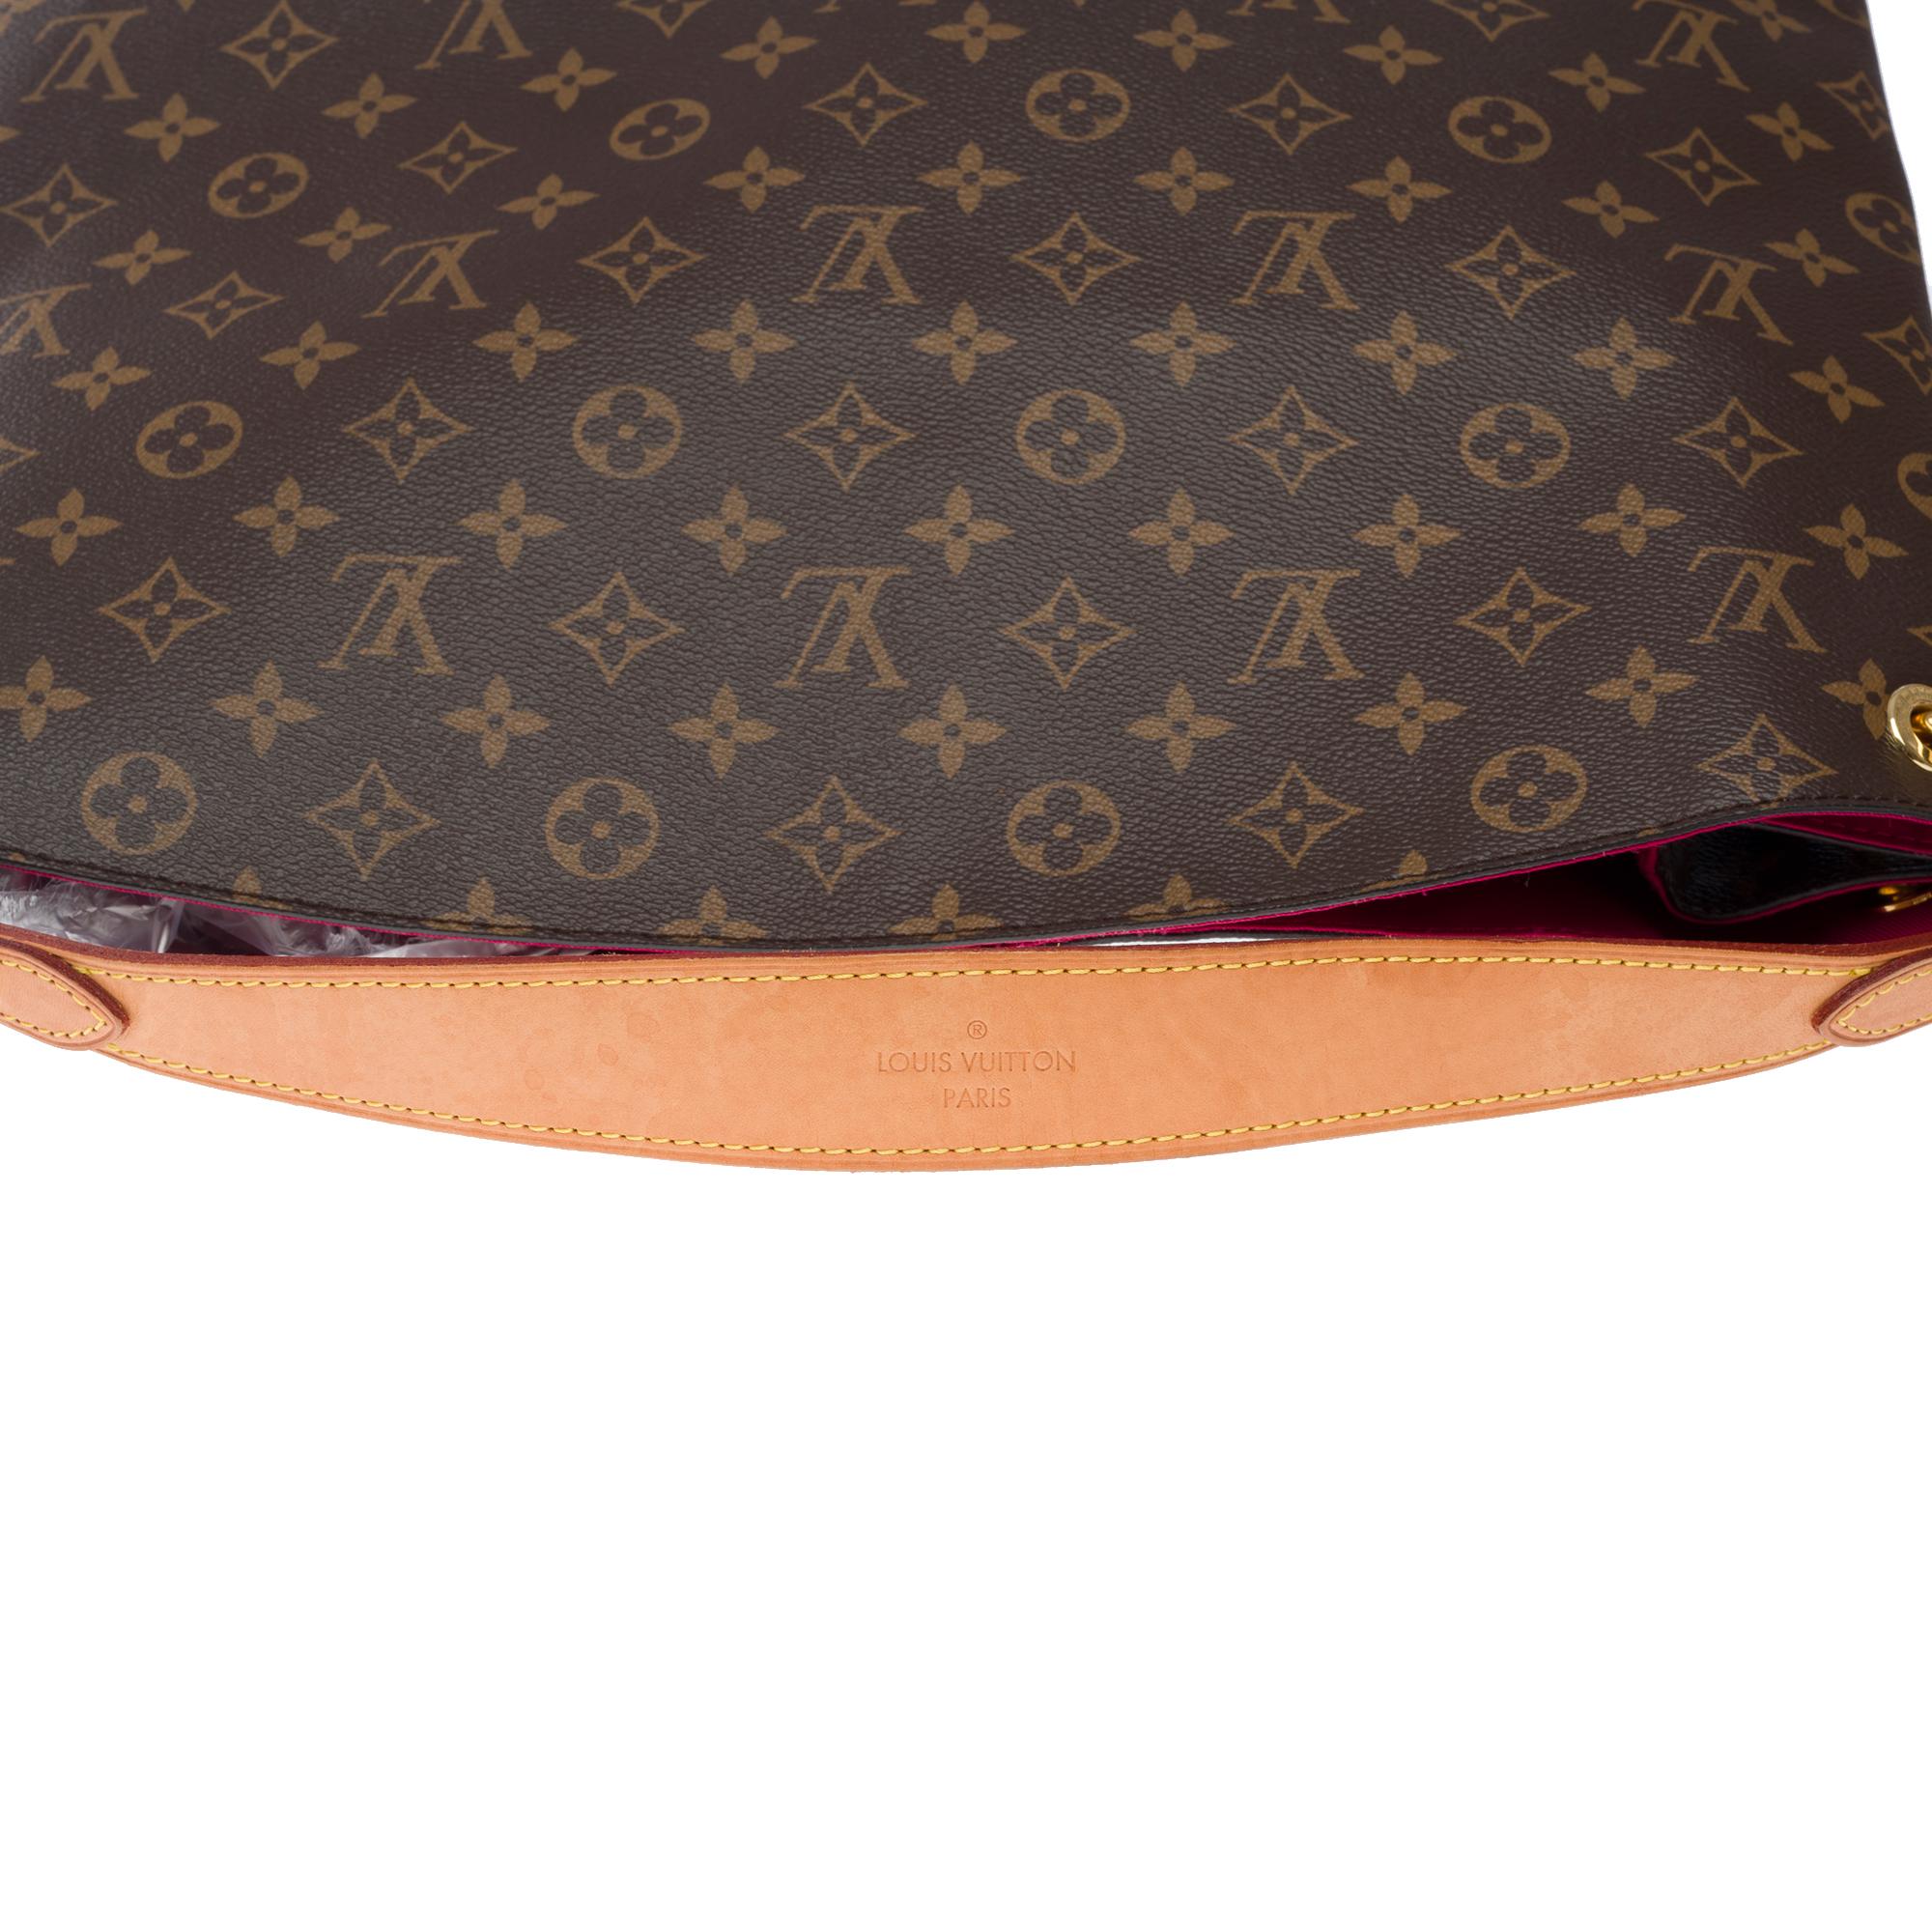 Louis Vuitton Graceful MM Tote bag in brown Monogram canvas, GHW For Sale 6